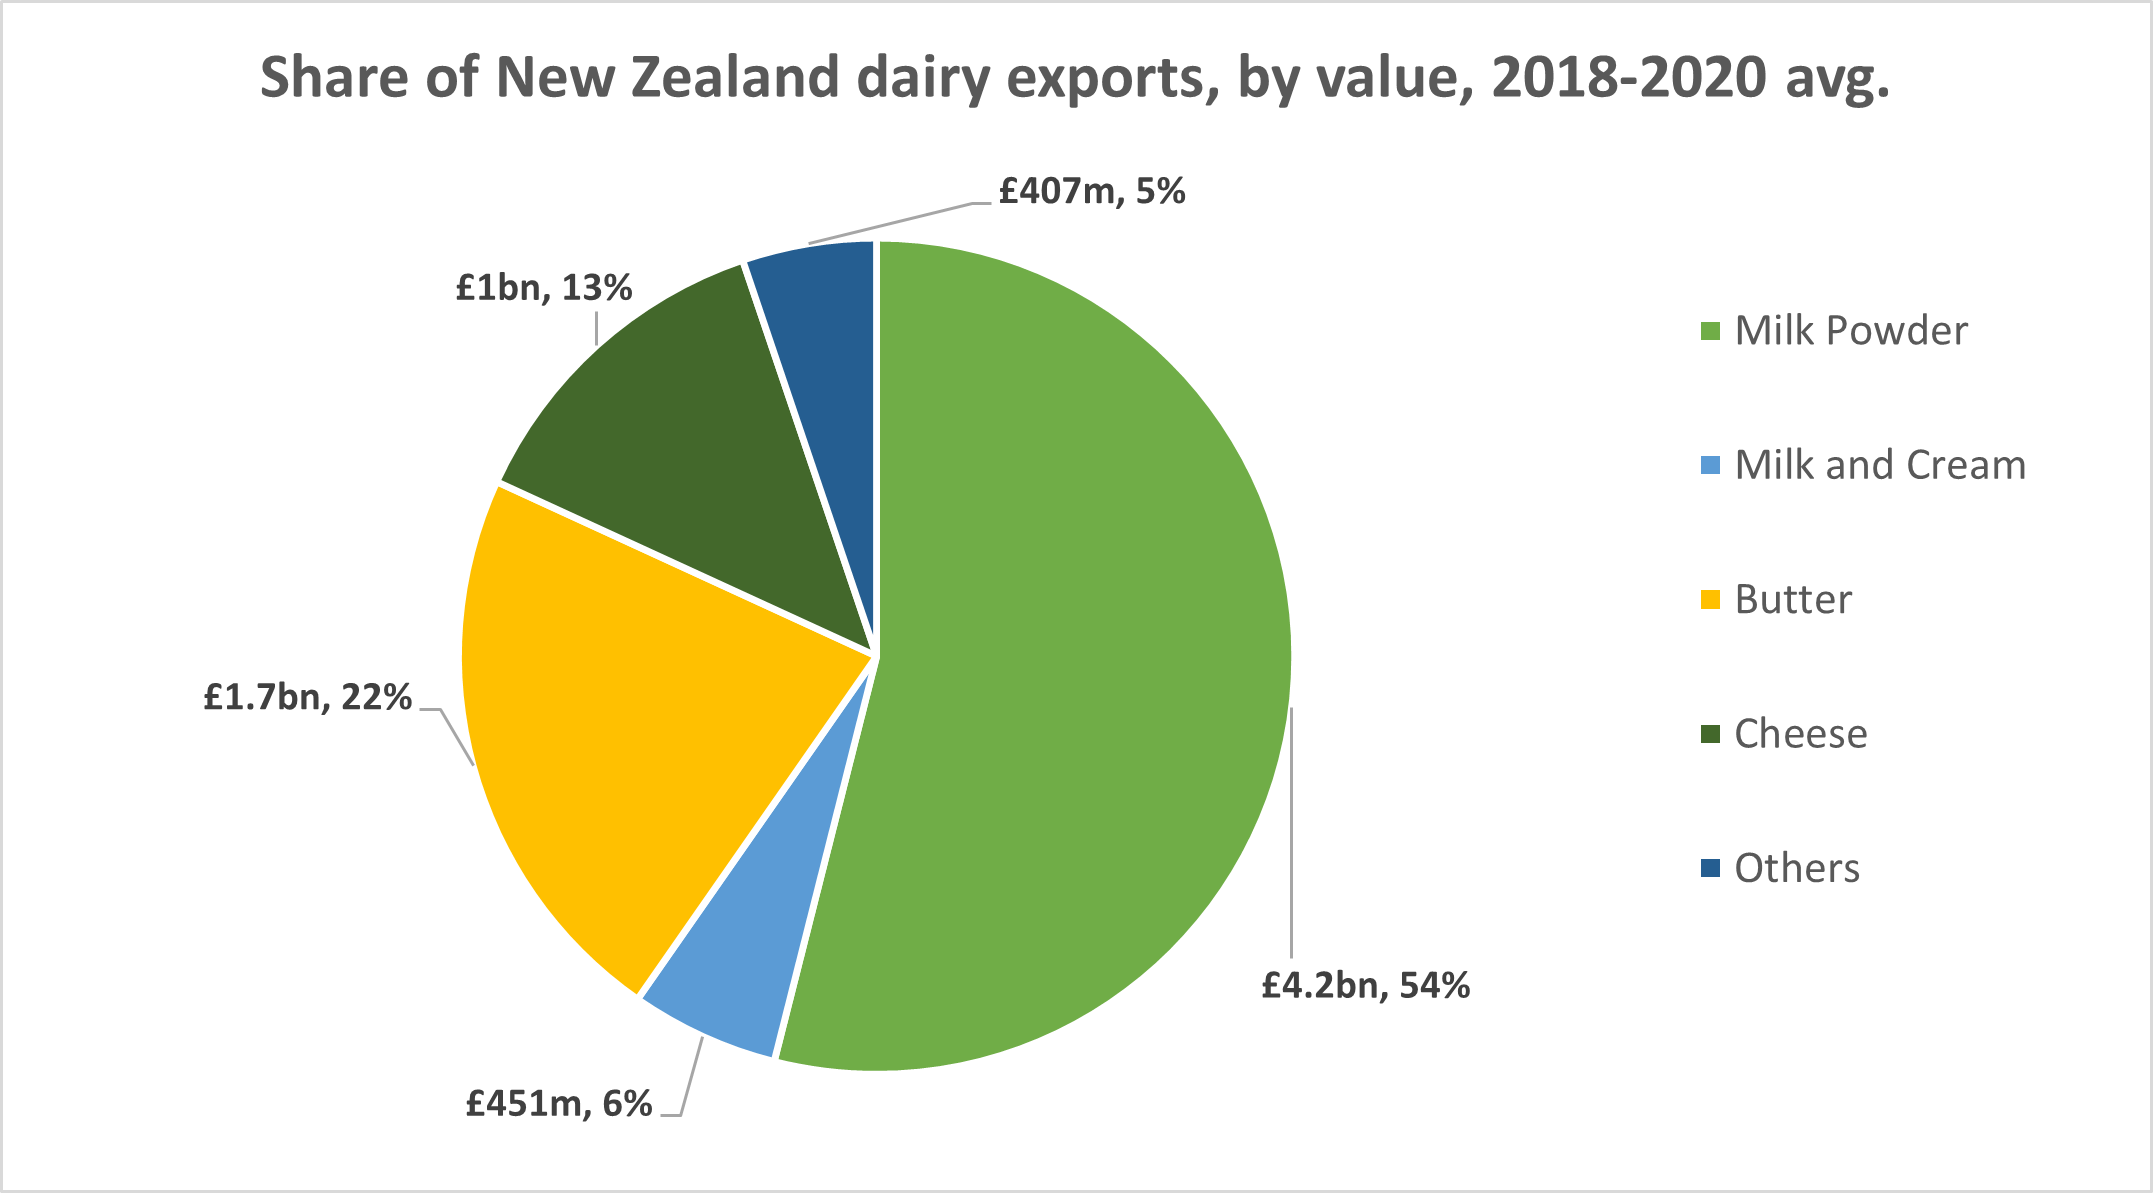 Graph showing the share of NZ dairy exports